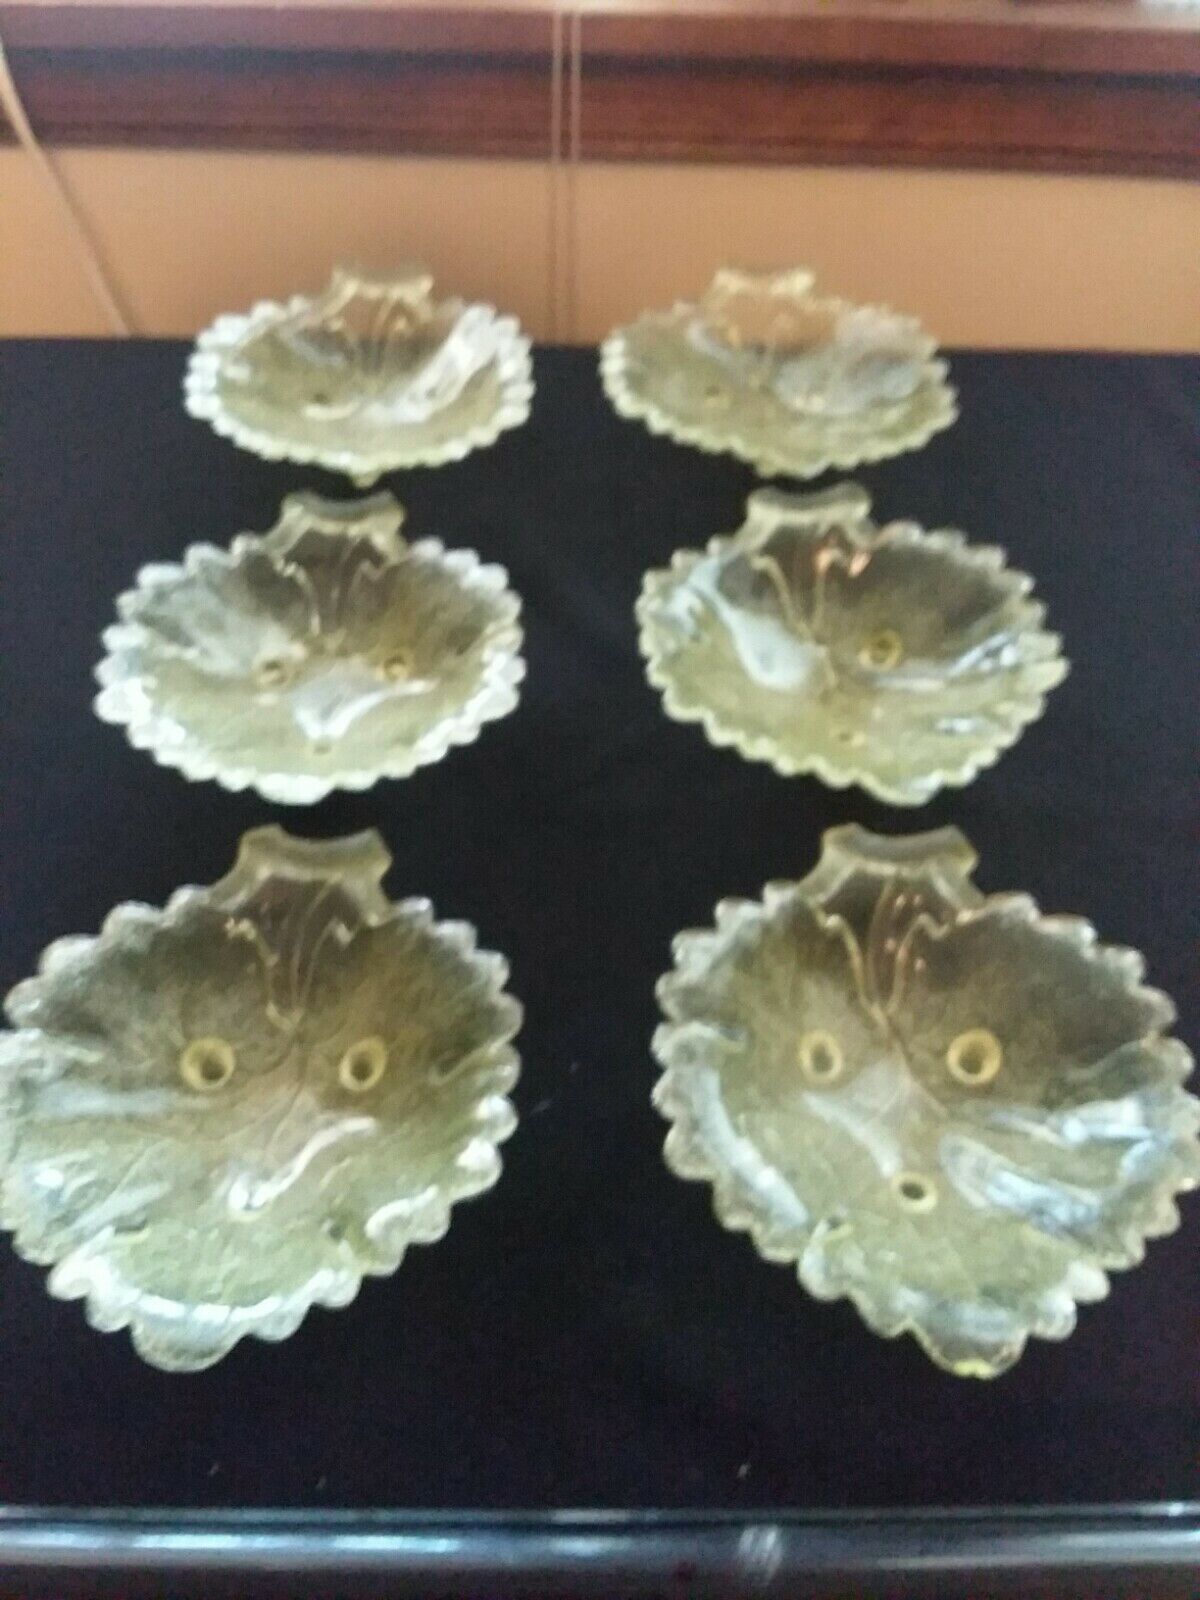 Vaseline Glass 6 Maple Leaf Sauce Dishes With Handles On Stubby Feet